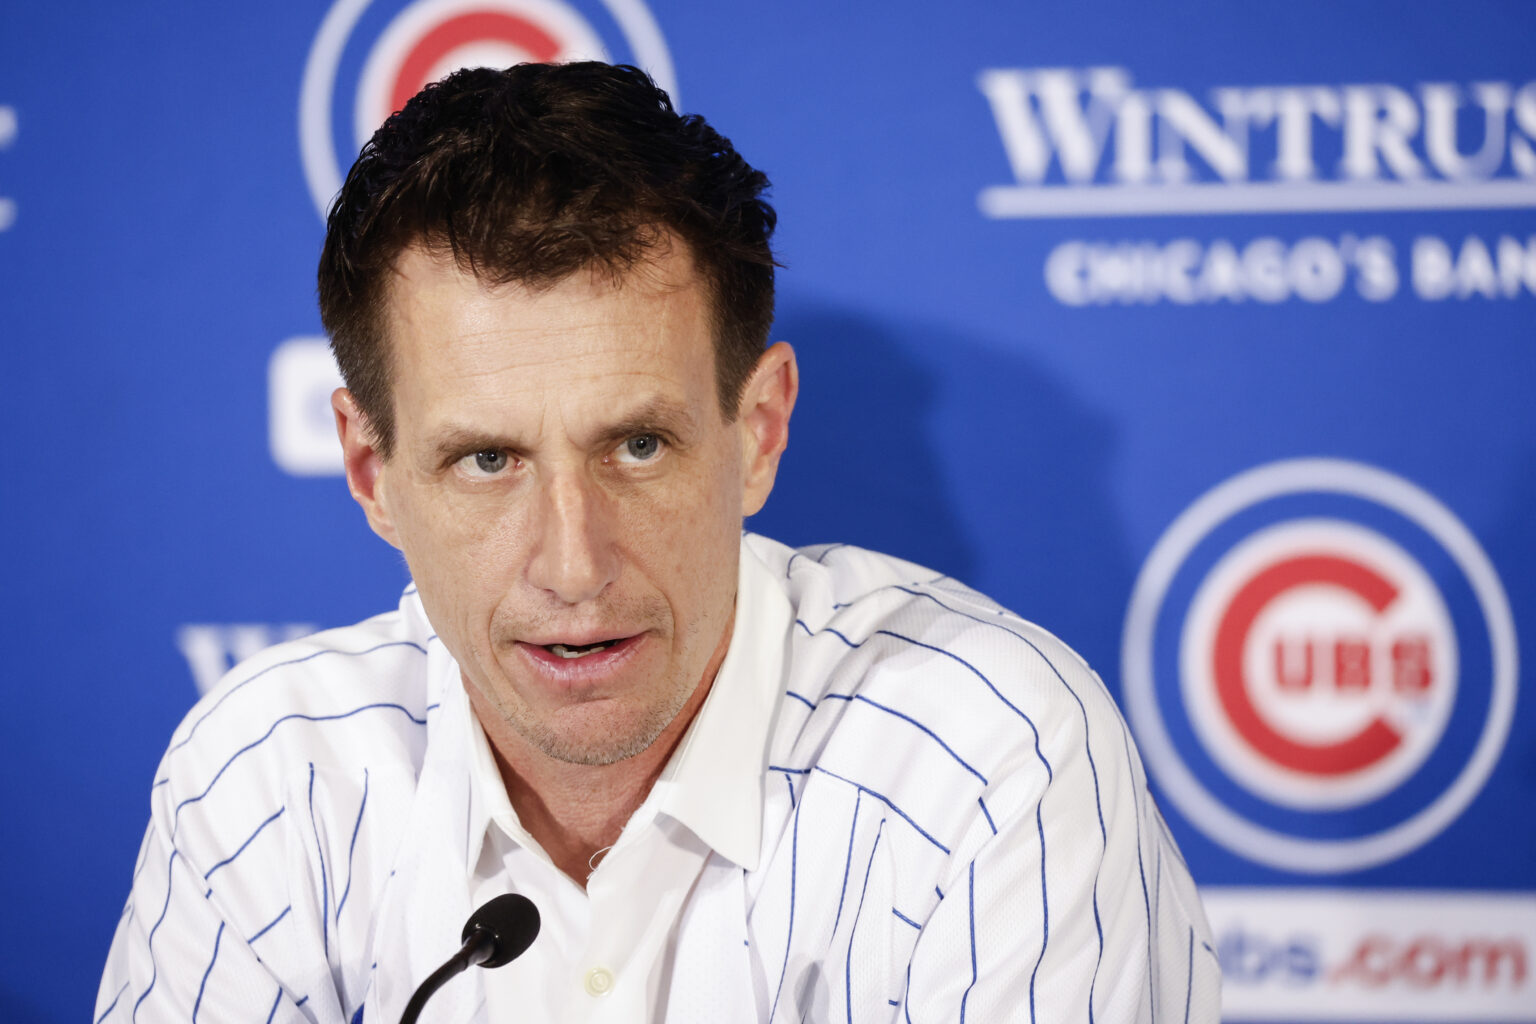 Milwaukee Brewers, Brewers News, Brewers Game, Craig Counsell, Chicago Cubs